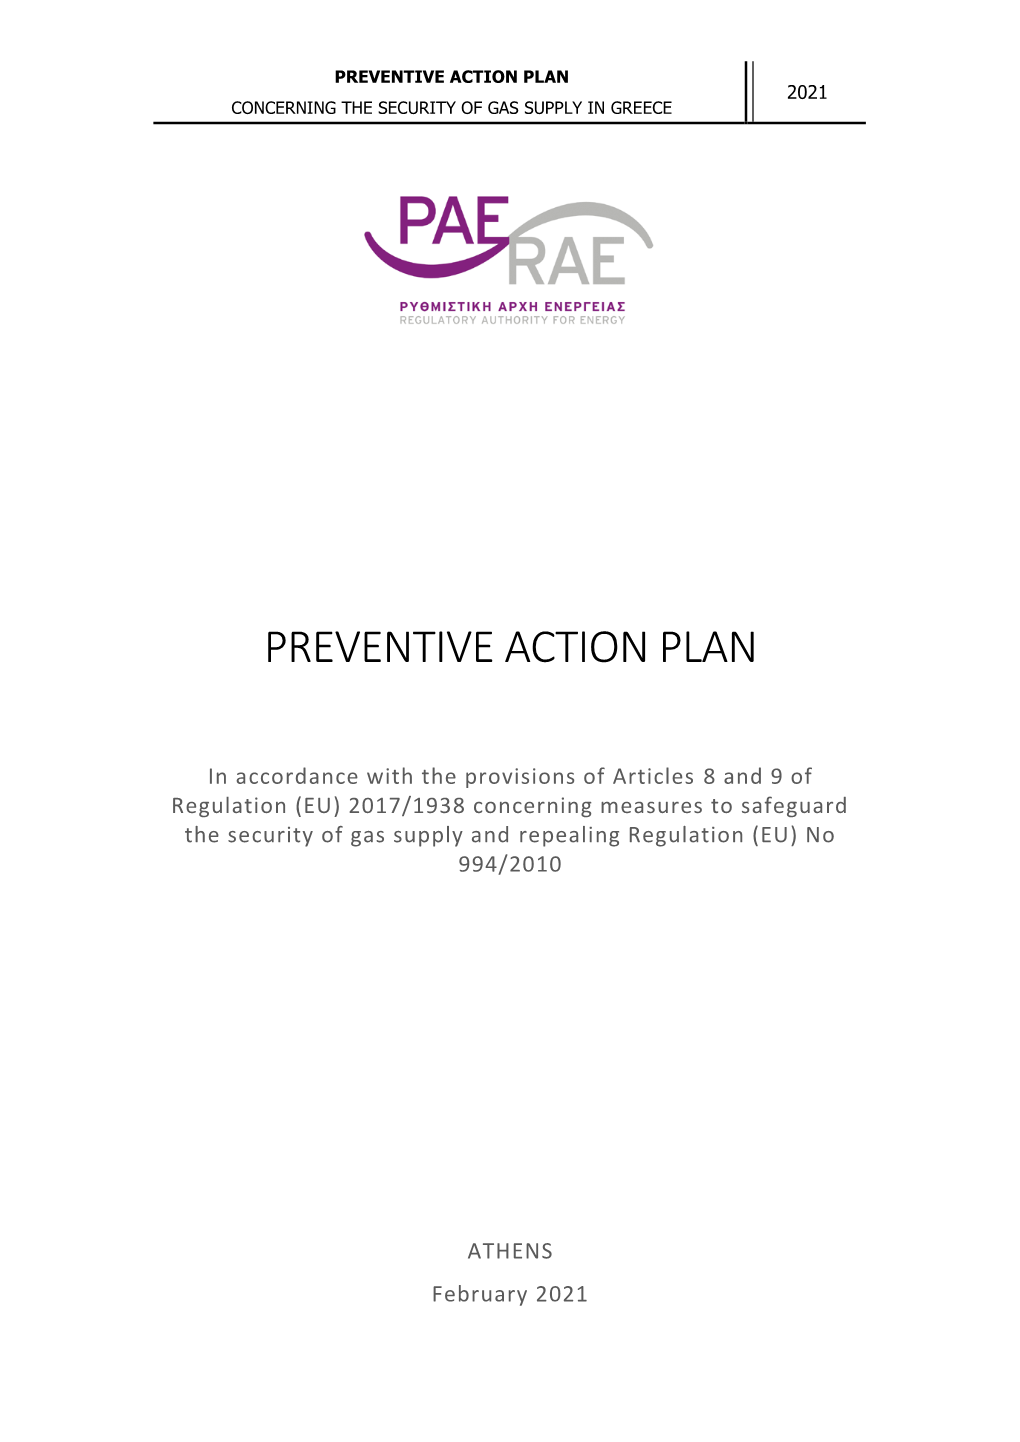 Preventive Action Plan 2021 Concerning the Security of Gas Supply in Greece